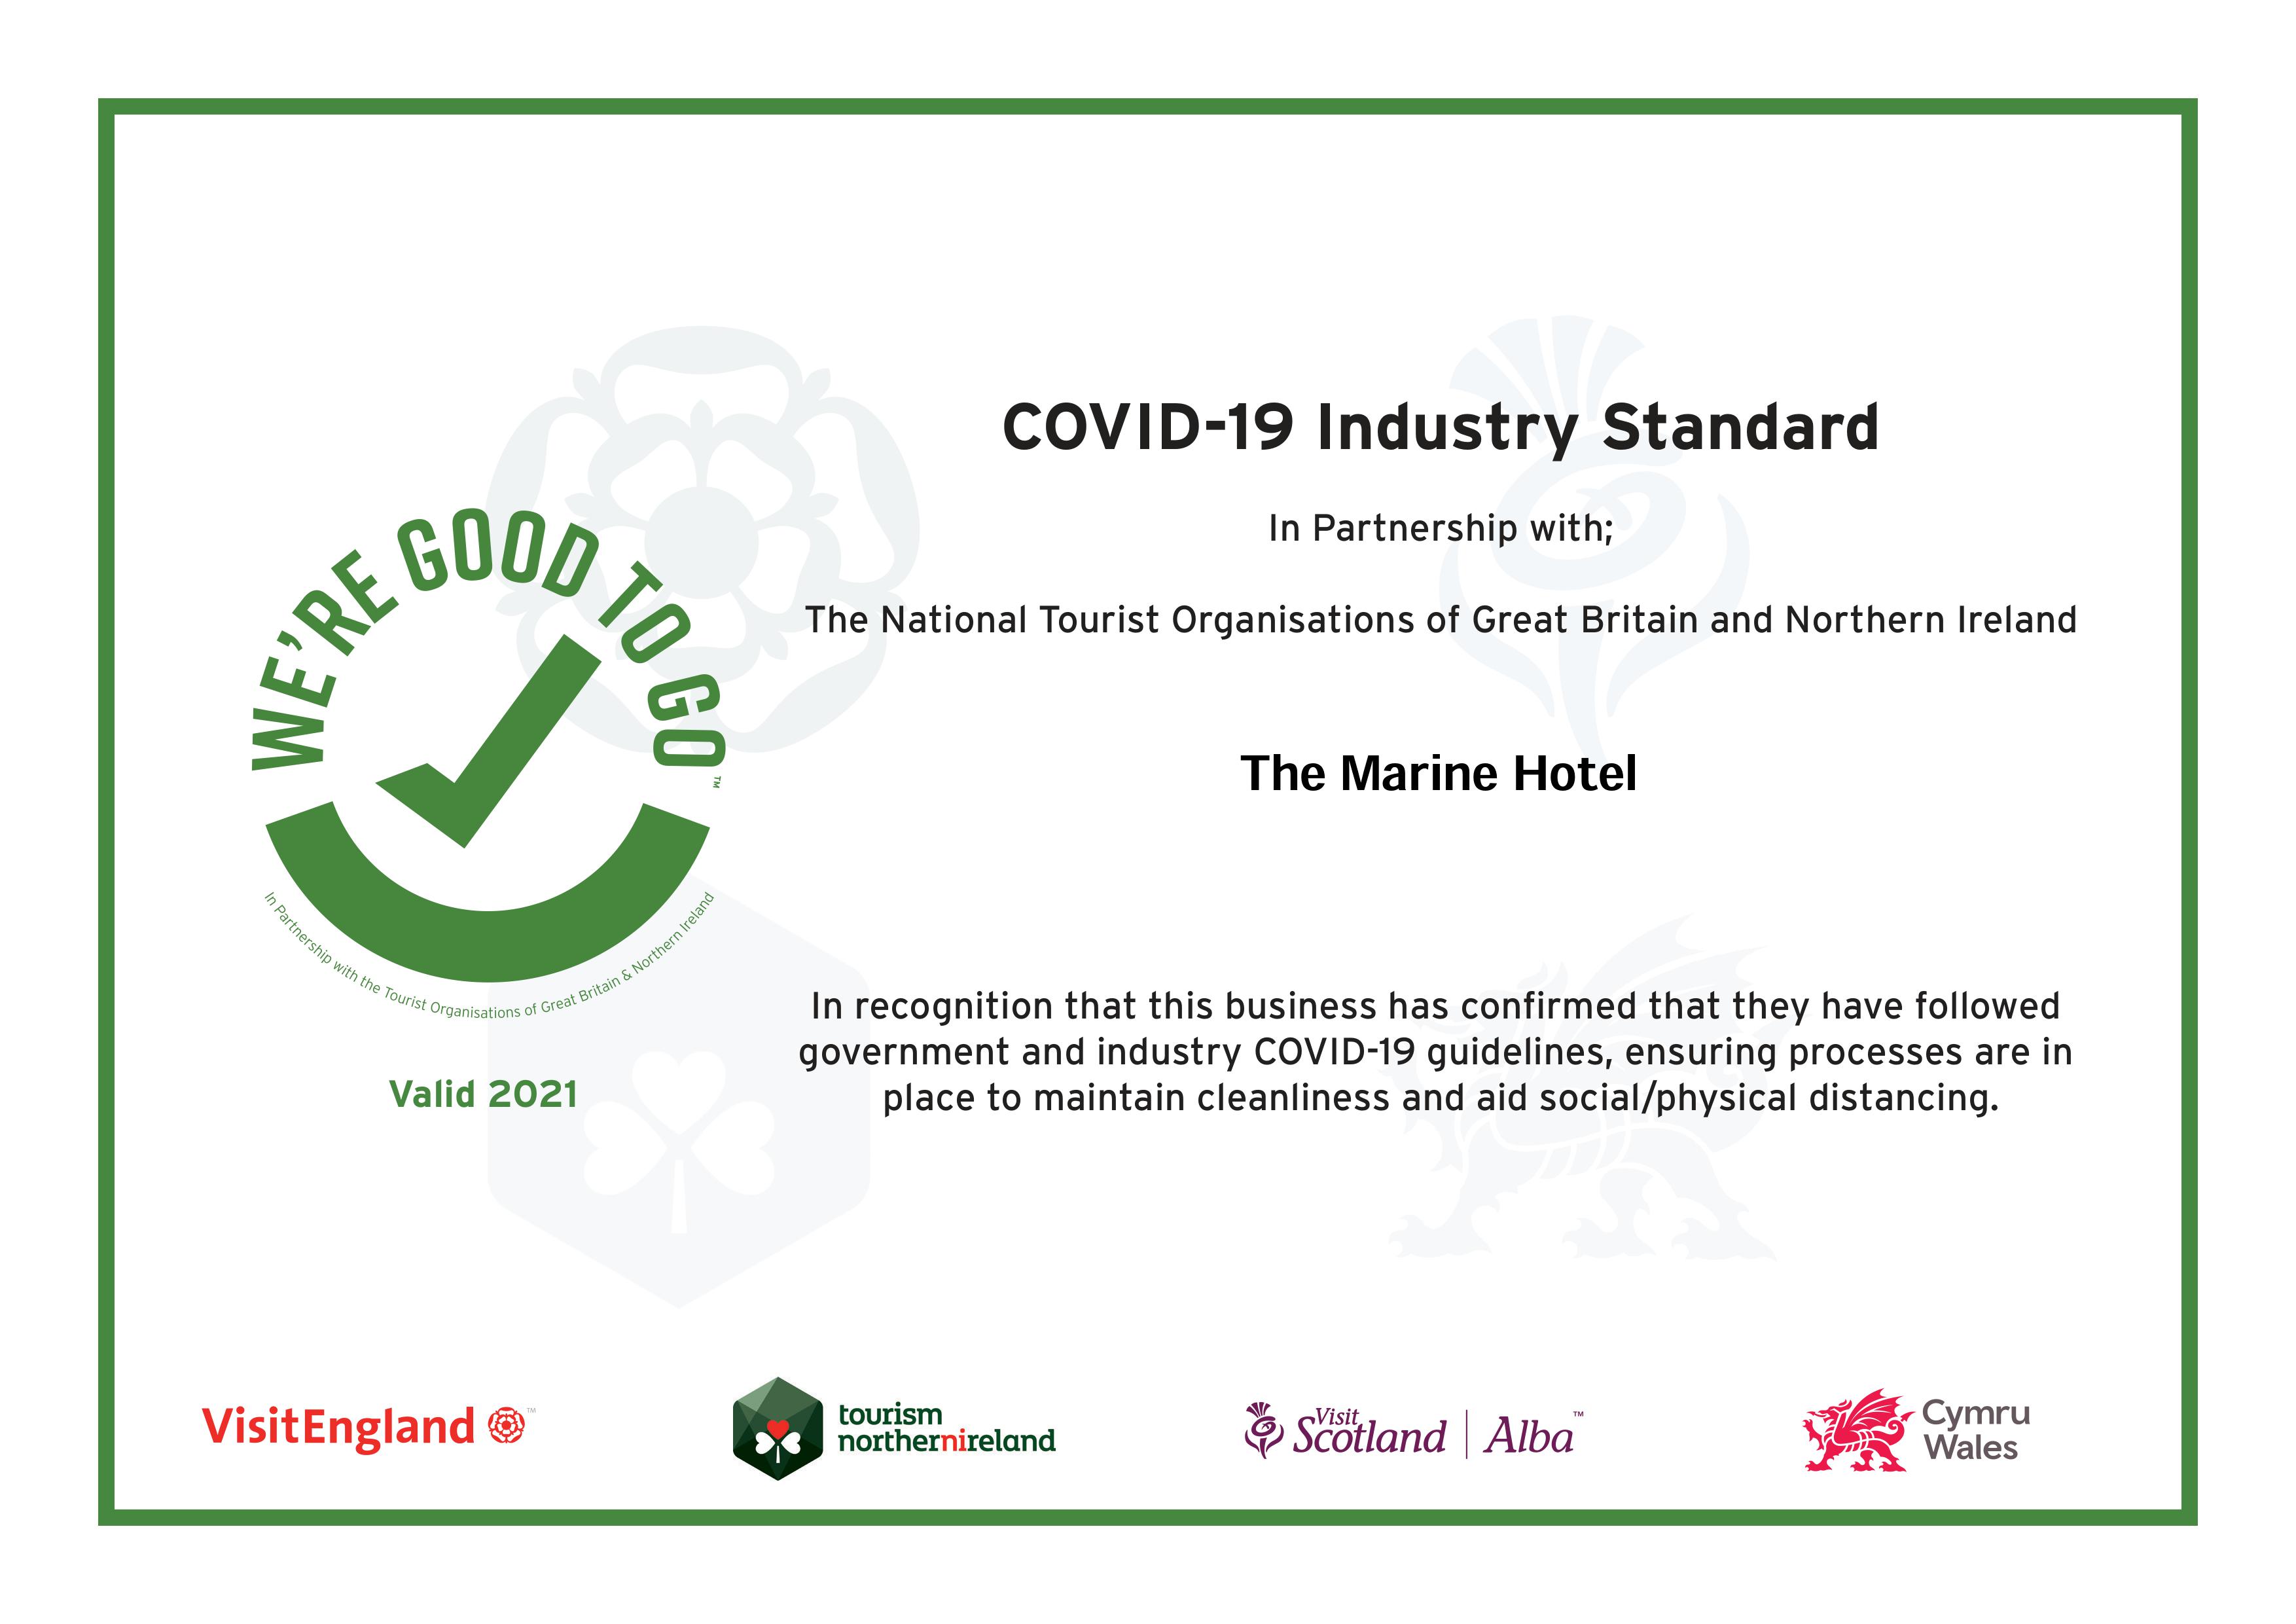 We're good to go. Covid-19 Industry Standard. In partnership with; The National Trust Organisations of Great Britain and Norther Ireland. In recognition that this business has confirmed that they have followed government and industry COVID-19 guidelines, ensuring processes are in place to maintain clenliness and aid social/physical distancing.